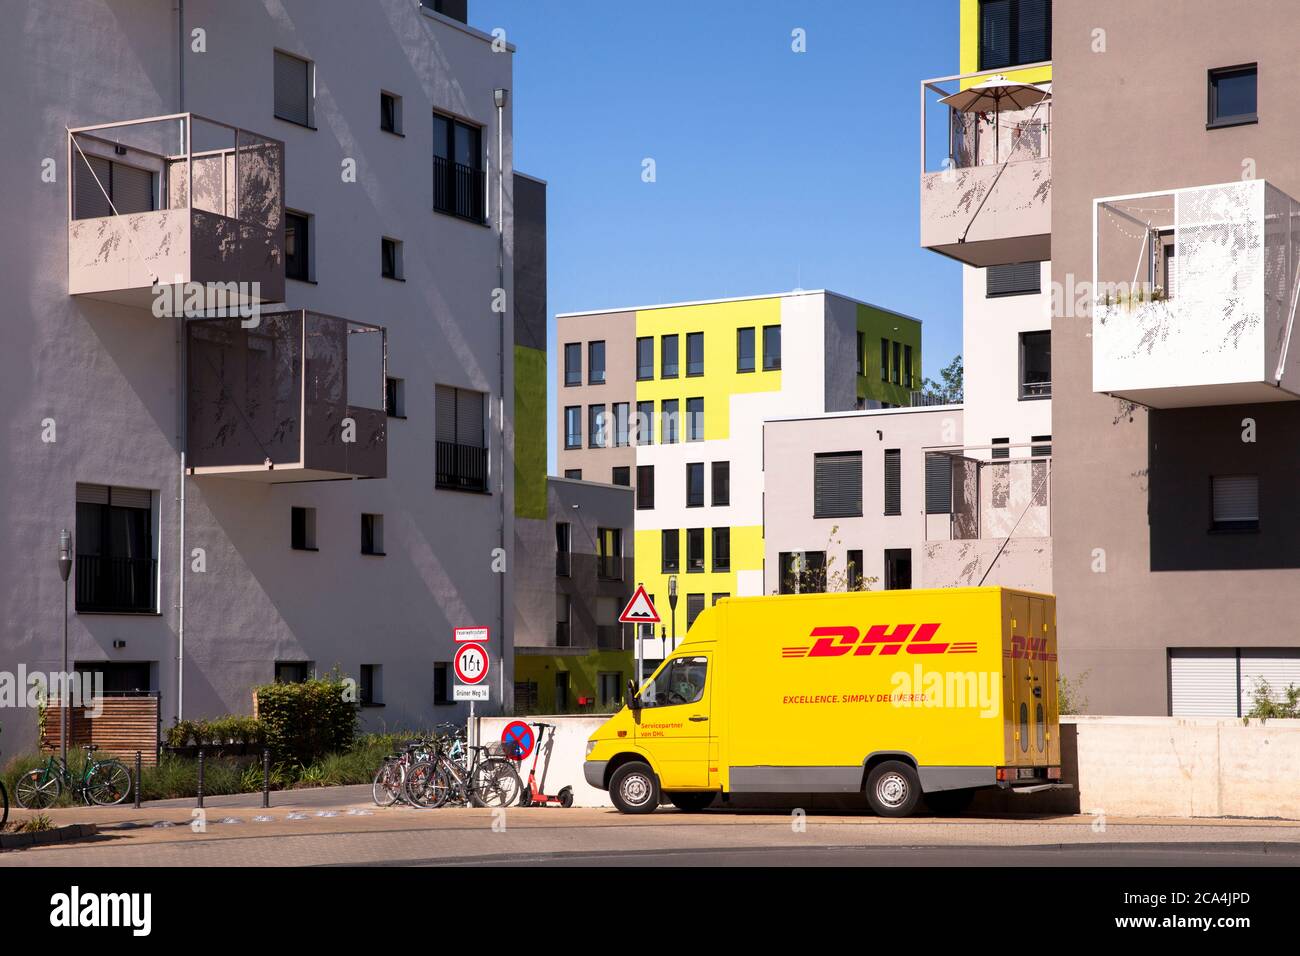 the Kubikon quarter of the GAG Immobilien AG in the Ehrenfeld district of Cologne, DHL parcel service car, Germany.  das Stadtquartier Kubikon der GAG Stock Photo